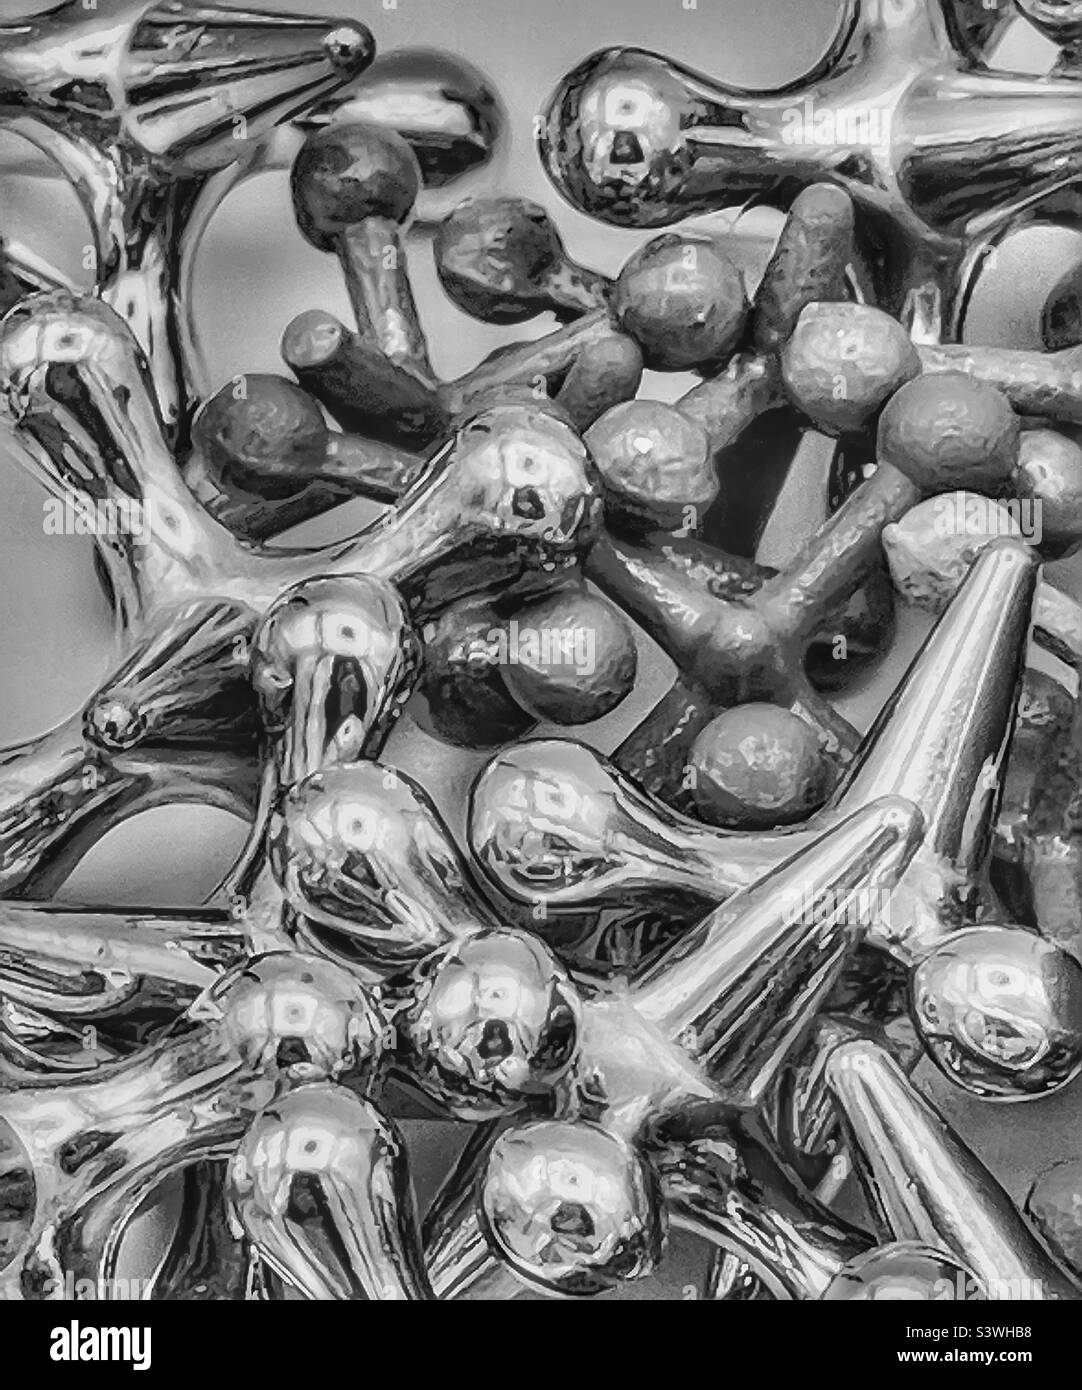 Miscellaneous jacks of varying sizes, colors and textures have been desaturated and given a glow effect. A nice artistic abstract focusing on shape, tone and texture, rather than color. Stock Photo